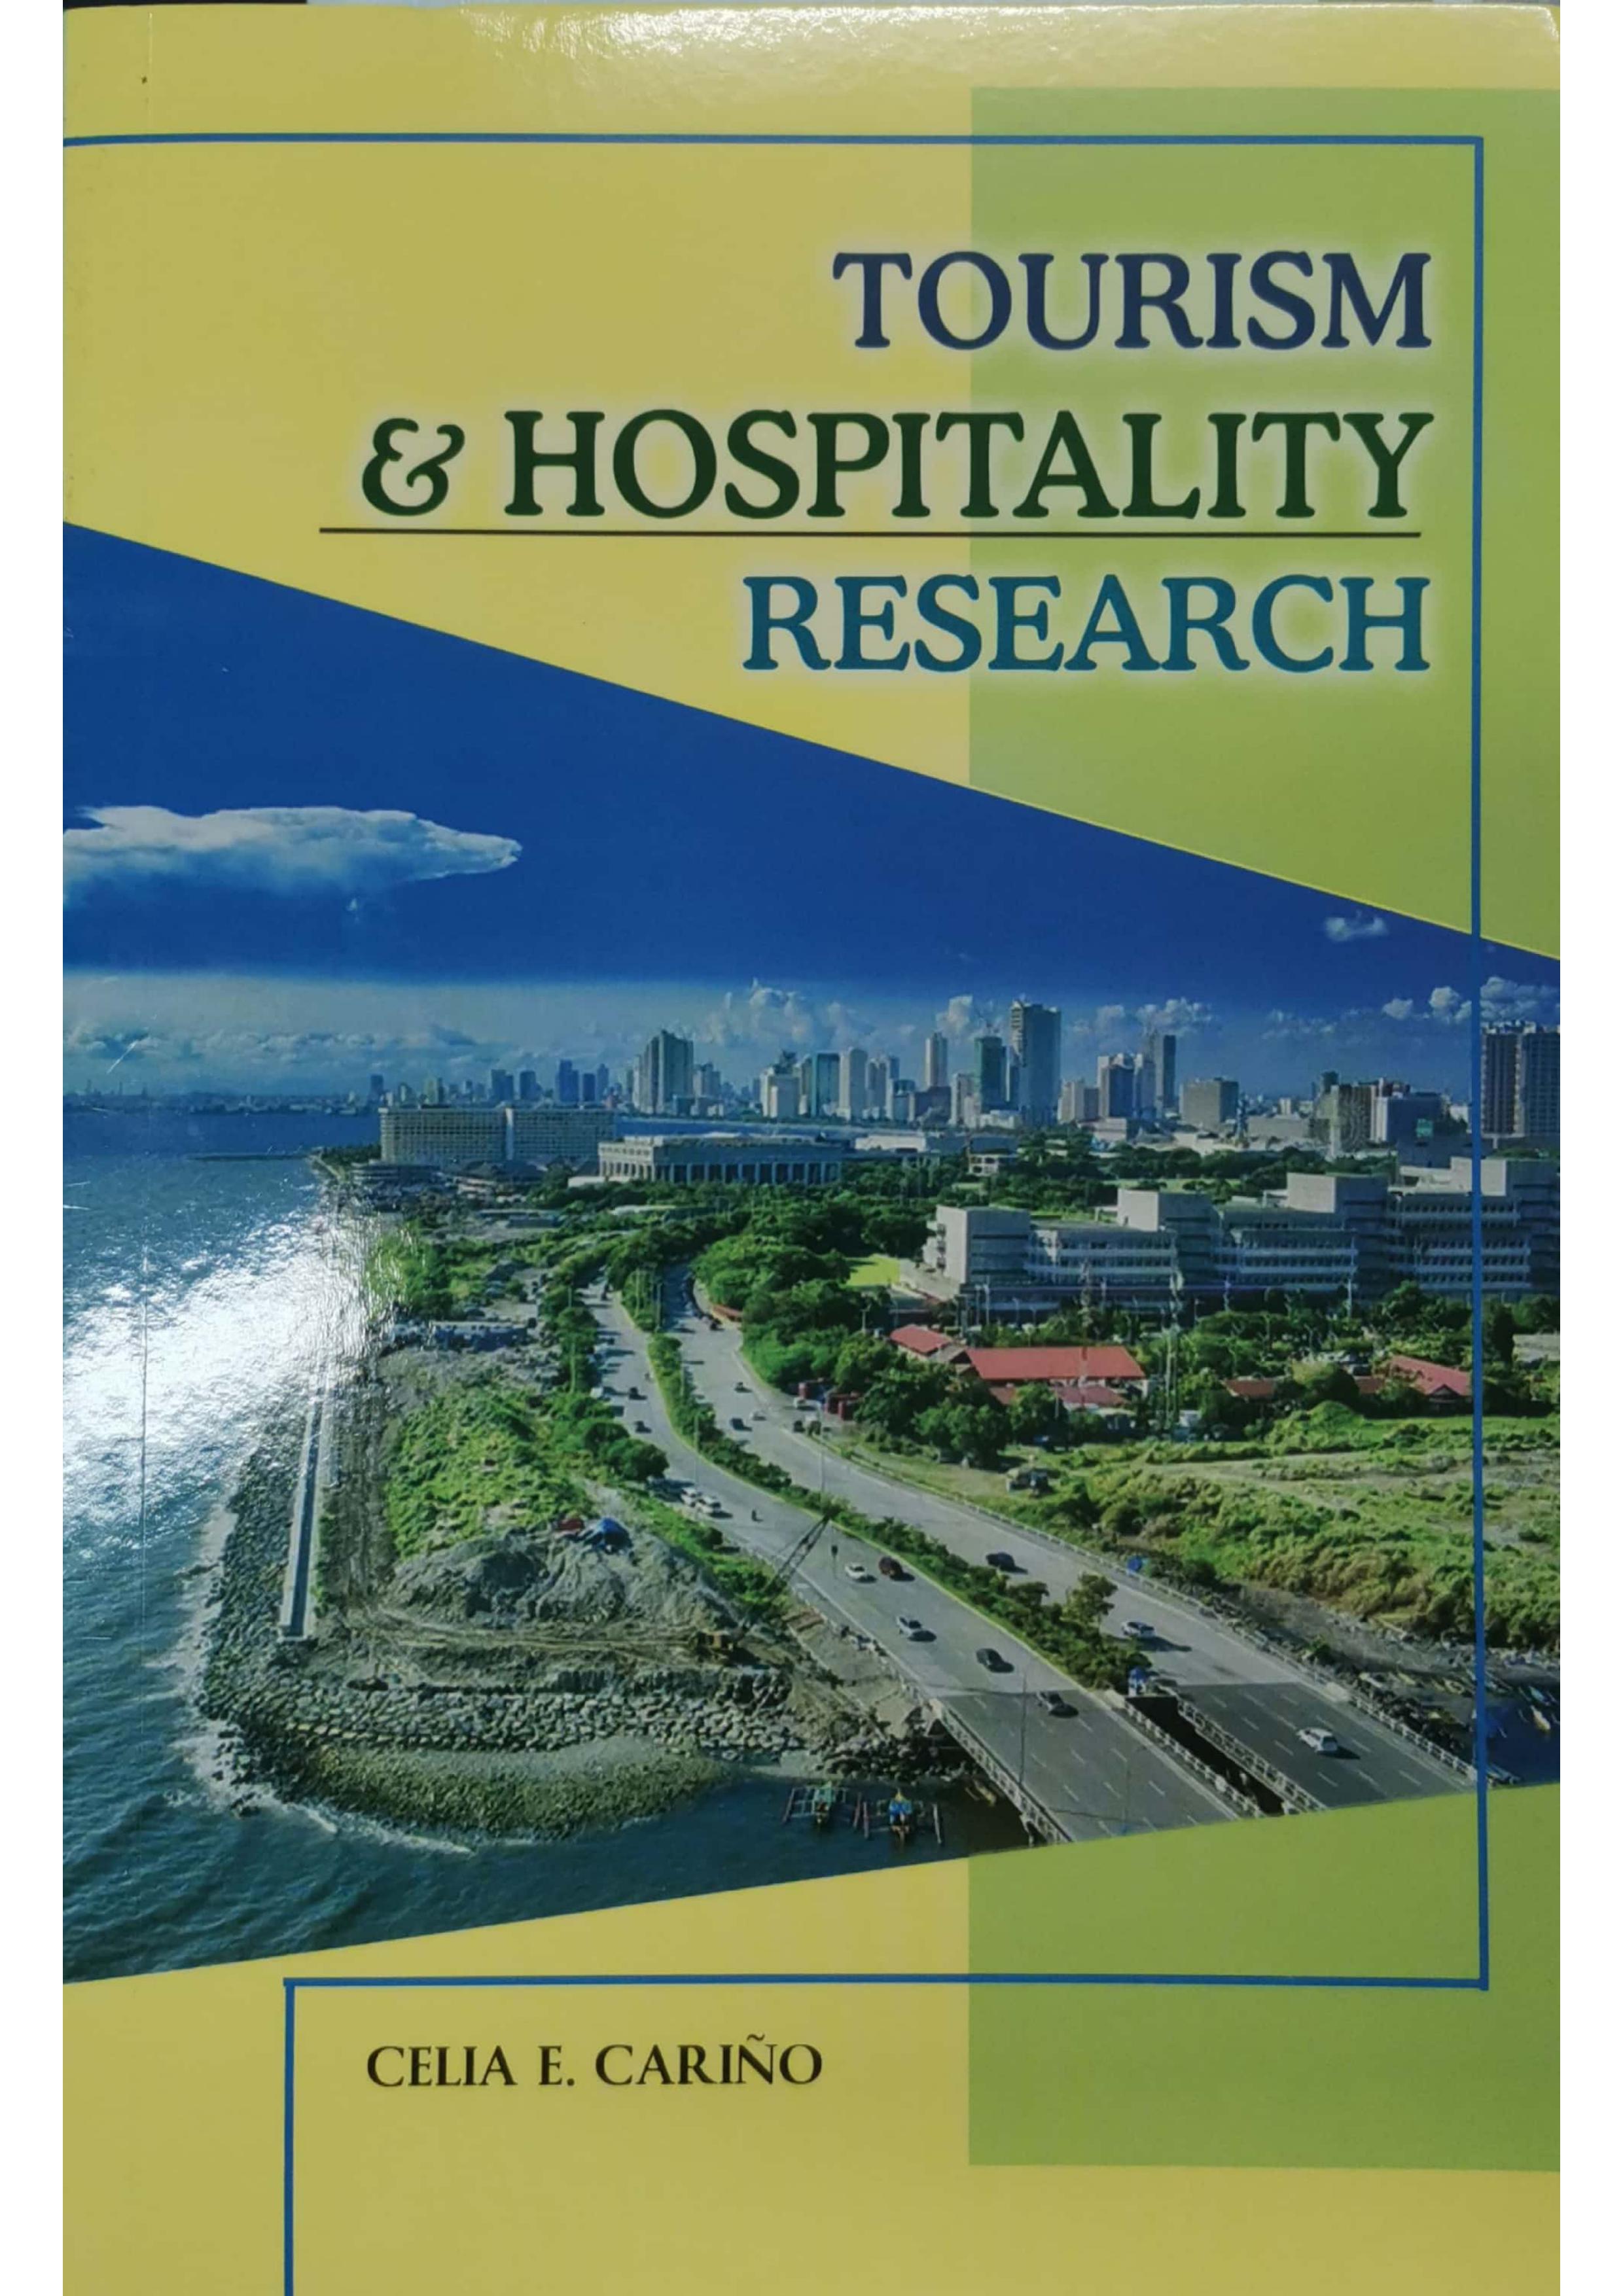 research paper on tourism and hospitality pdf